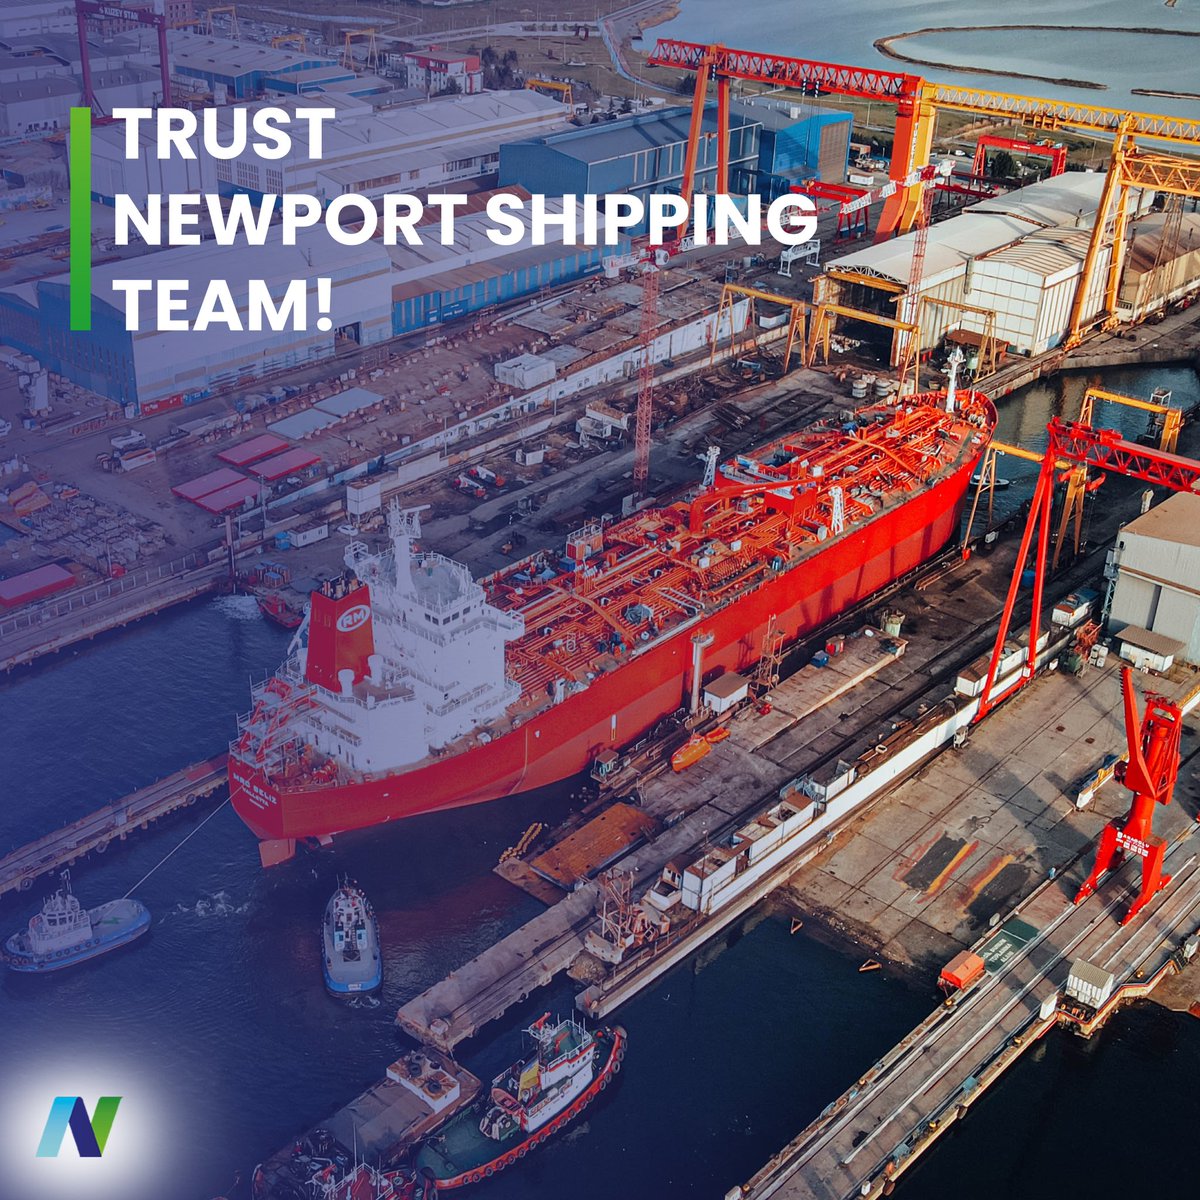 At Newport Shipping, we're dedicated to excellence in every aspect of ship repair and maintenance. With our skilled team, state-of-the-art facilities, and commitment to quality, we ensure that every vessel receives the utmost care and attention.

#NewportShipping